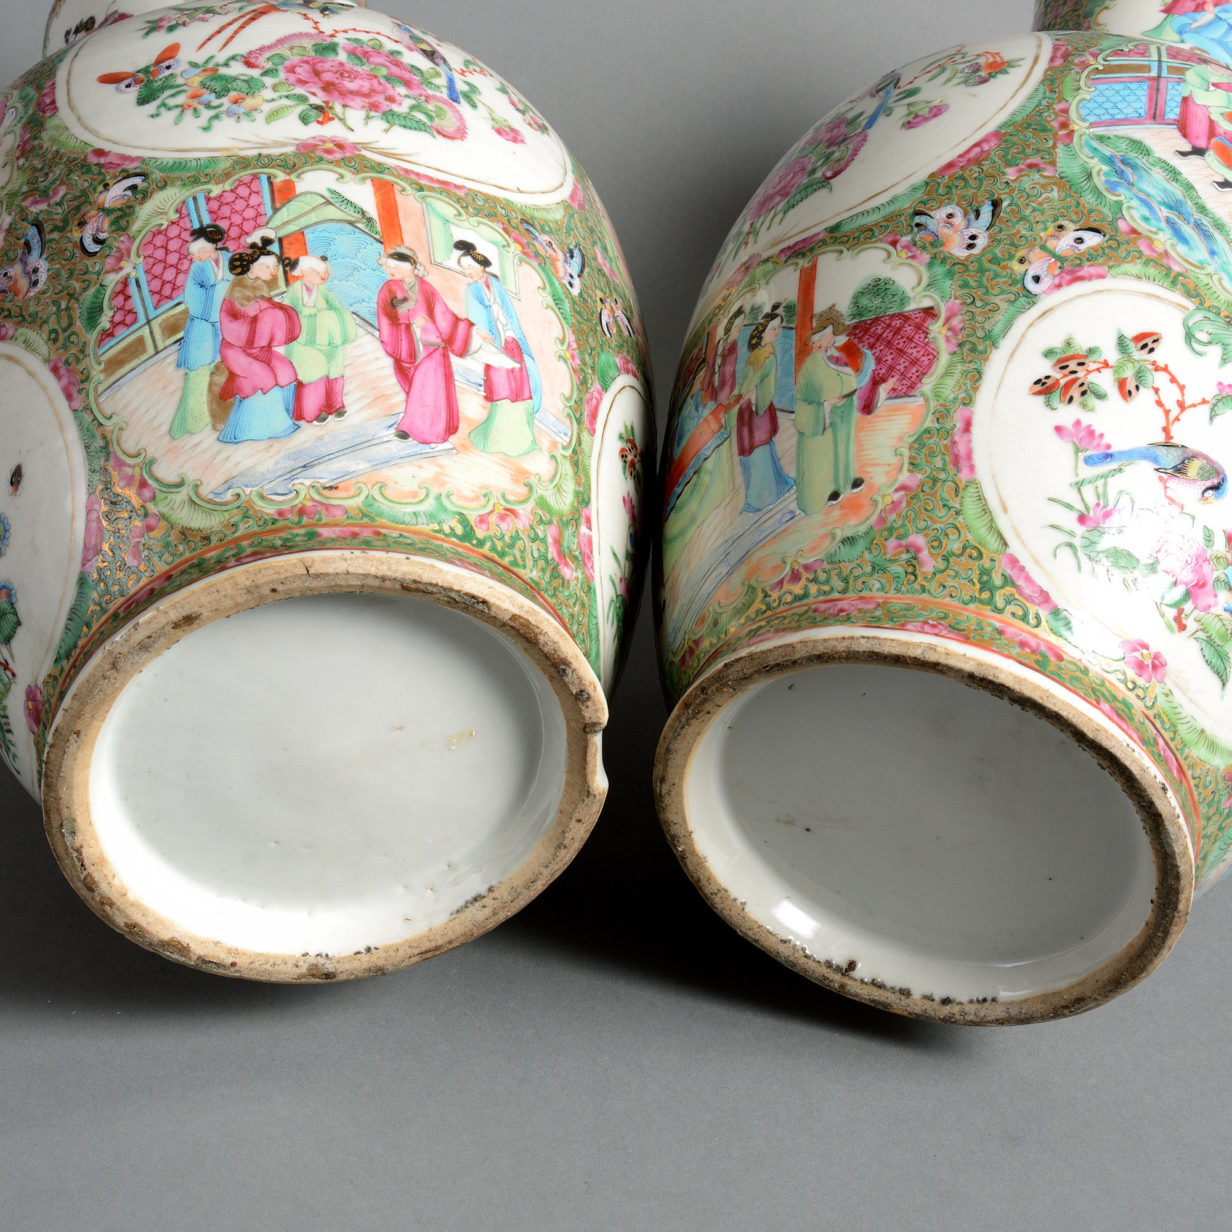 A 19th Century Pair of Canton Porcelain Vases & Covers